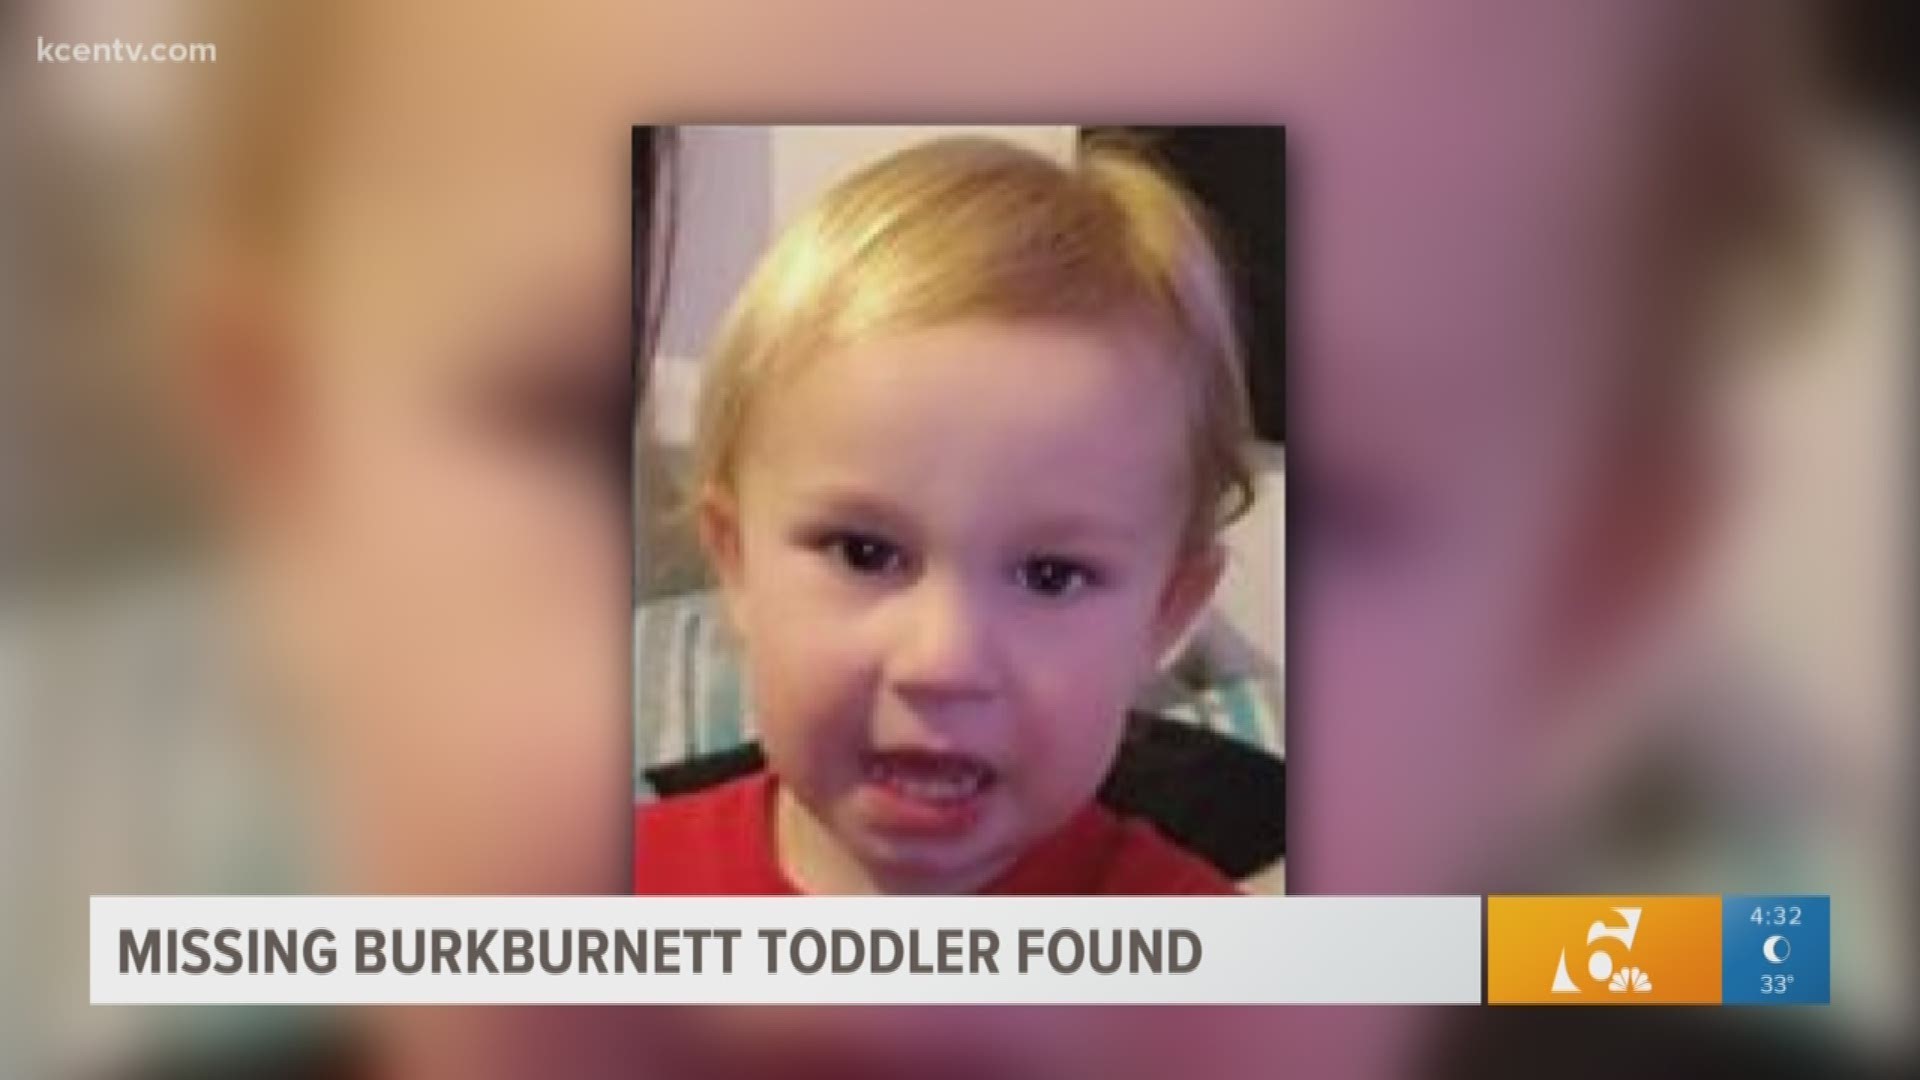 The toddler was found safe in New Mexico.